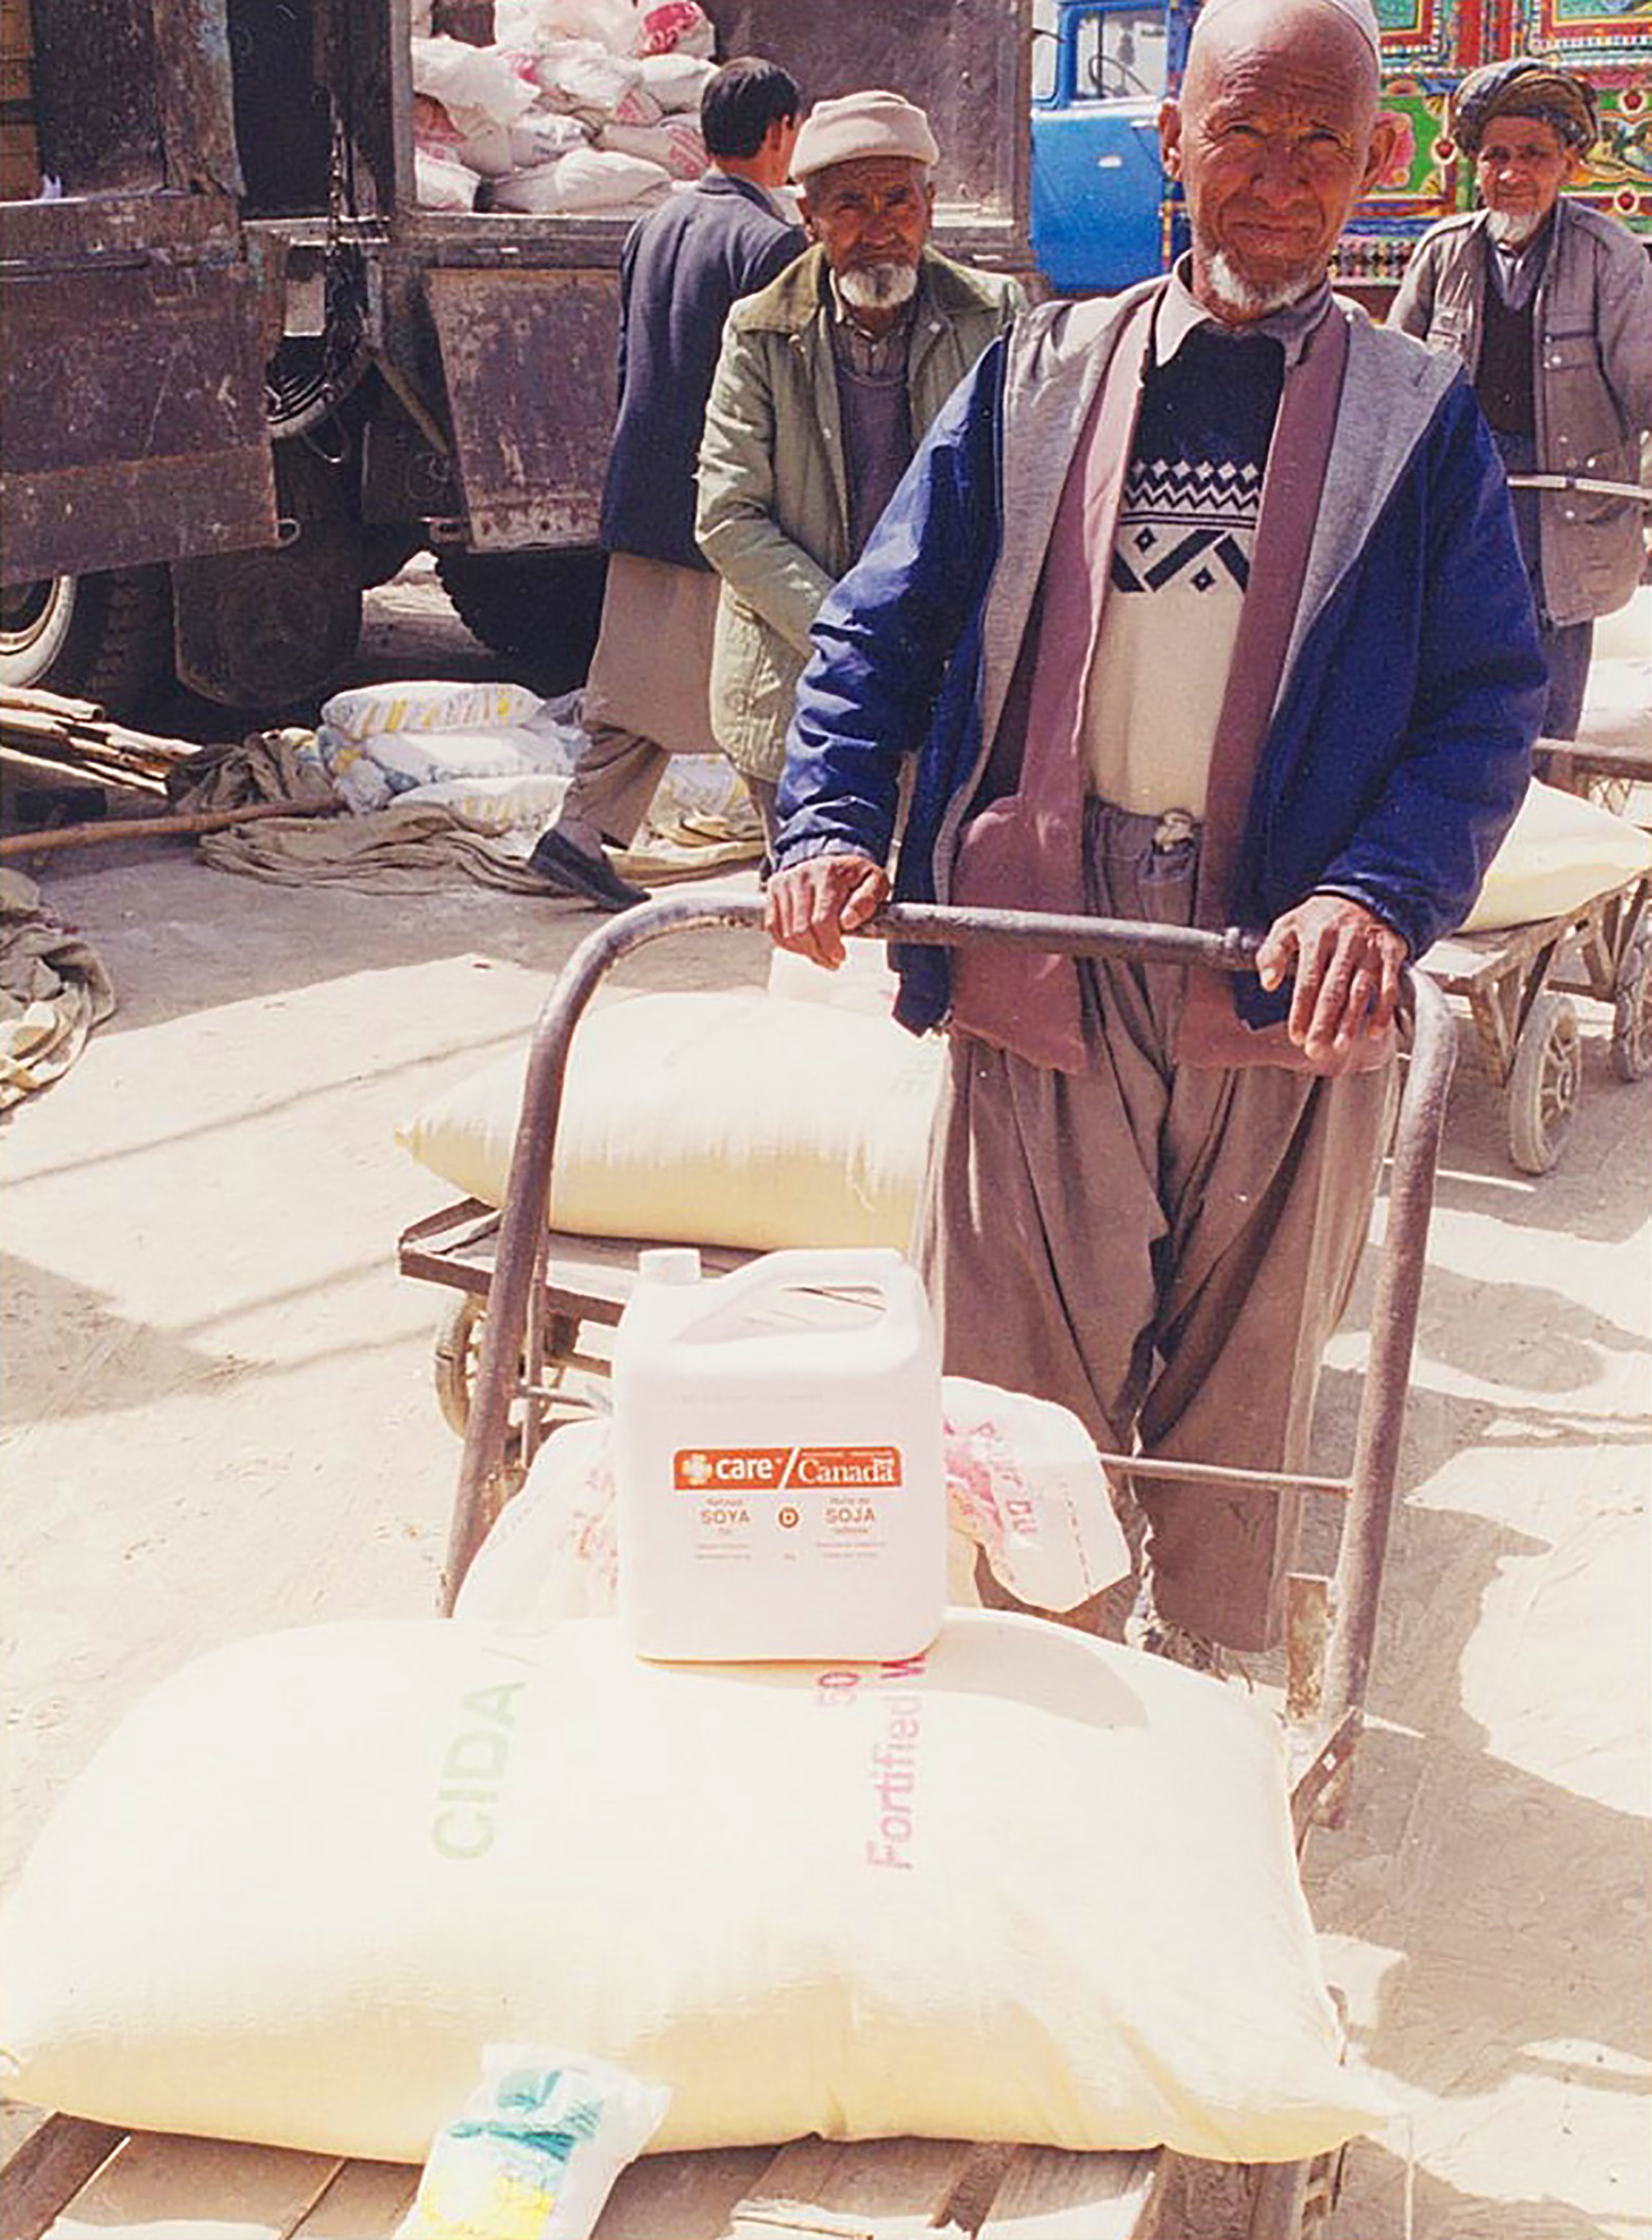 Kevin Weedmark took this photo in Aftghanistan while on a CIDA project. It shows volunteers distributing Canadian wheat, cooking oil, lentils, and iodized salt  food intended to keep a family alive for a month.